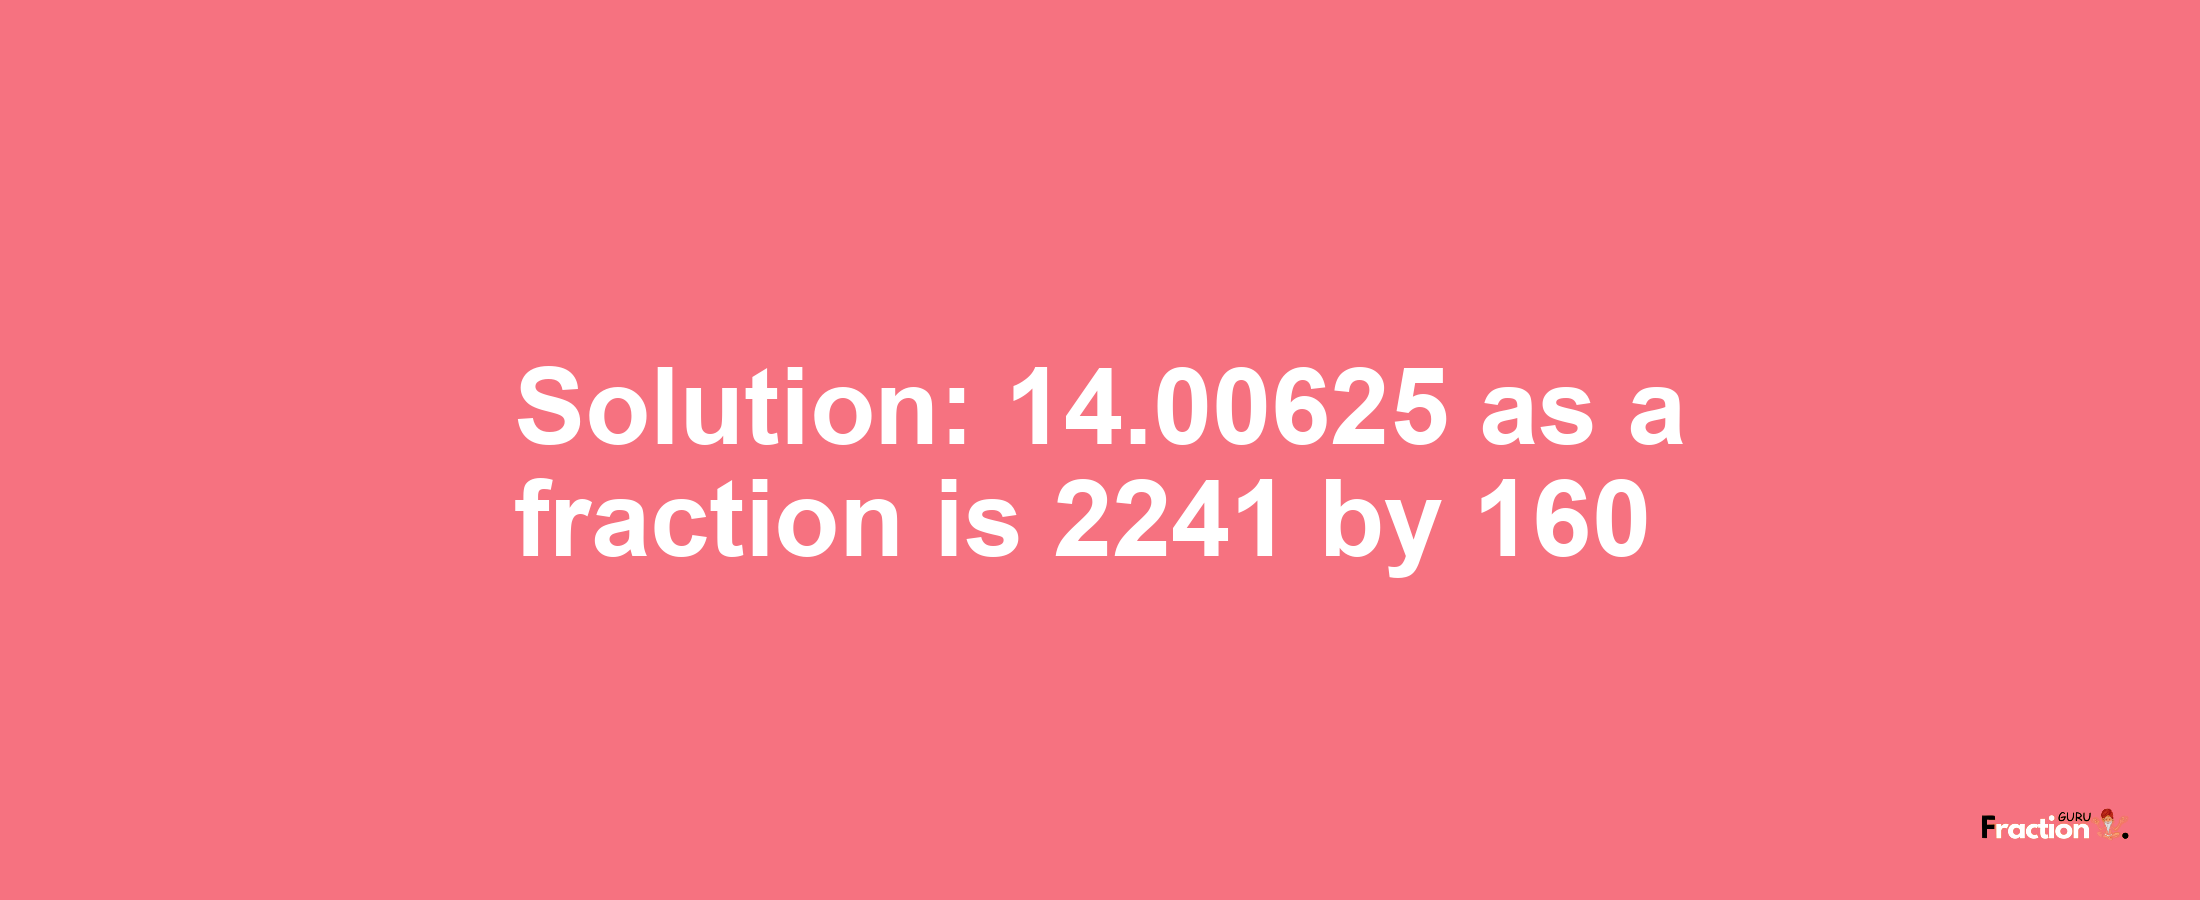 Solution:14.00625 as a fraction is 2241/160